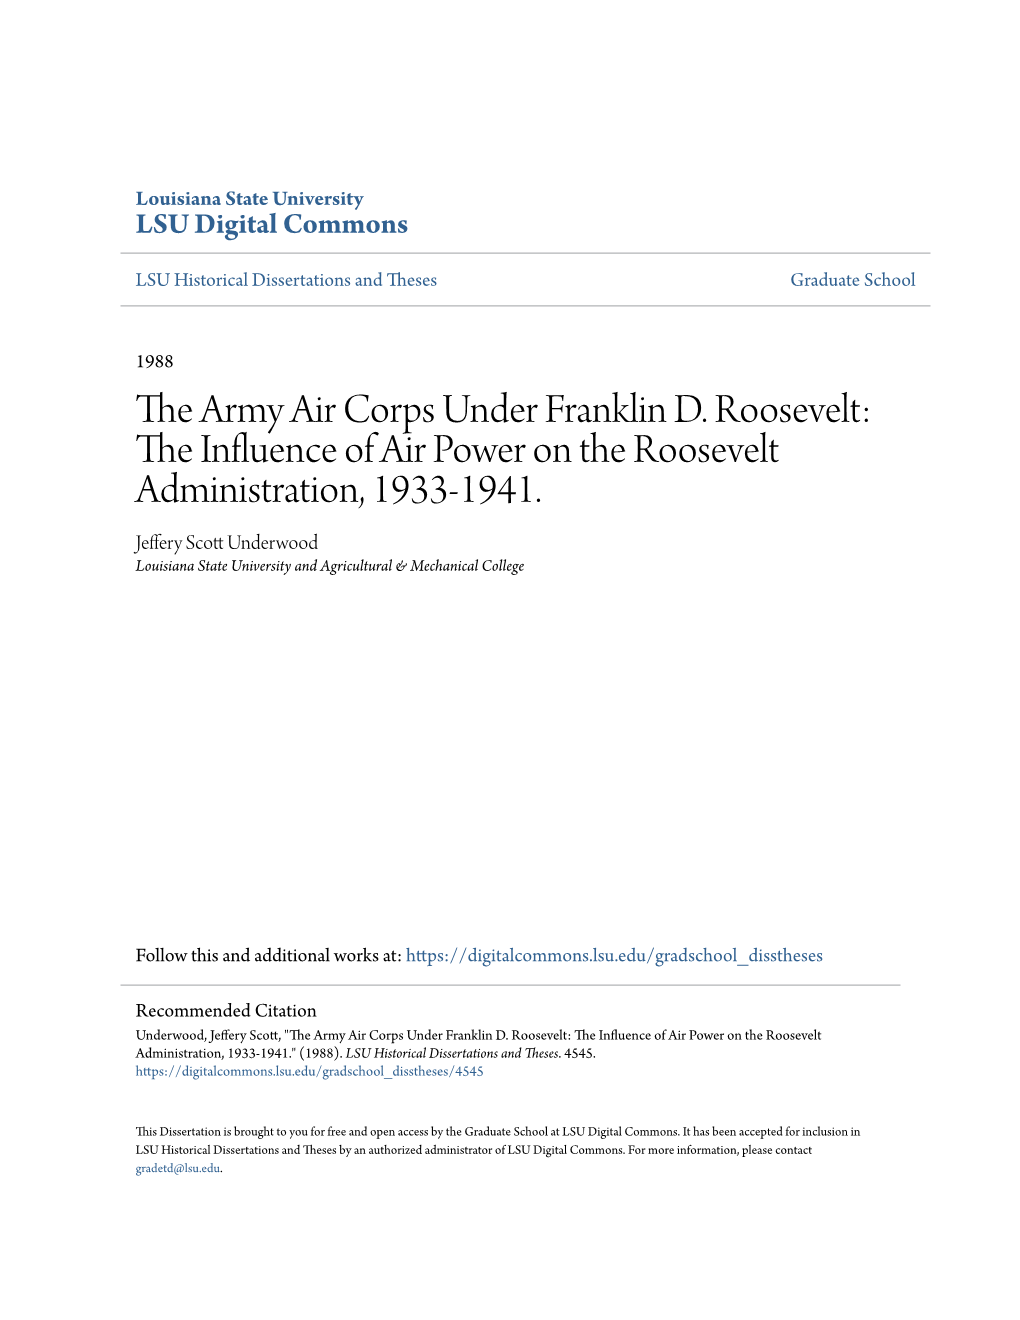 The Army Air Corps Under Franklin D. Roosevelt: the Nfluei Nce of Air Power on the Roosevelt Administration, 1933-1941